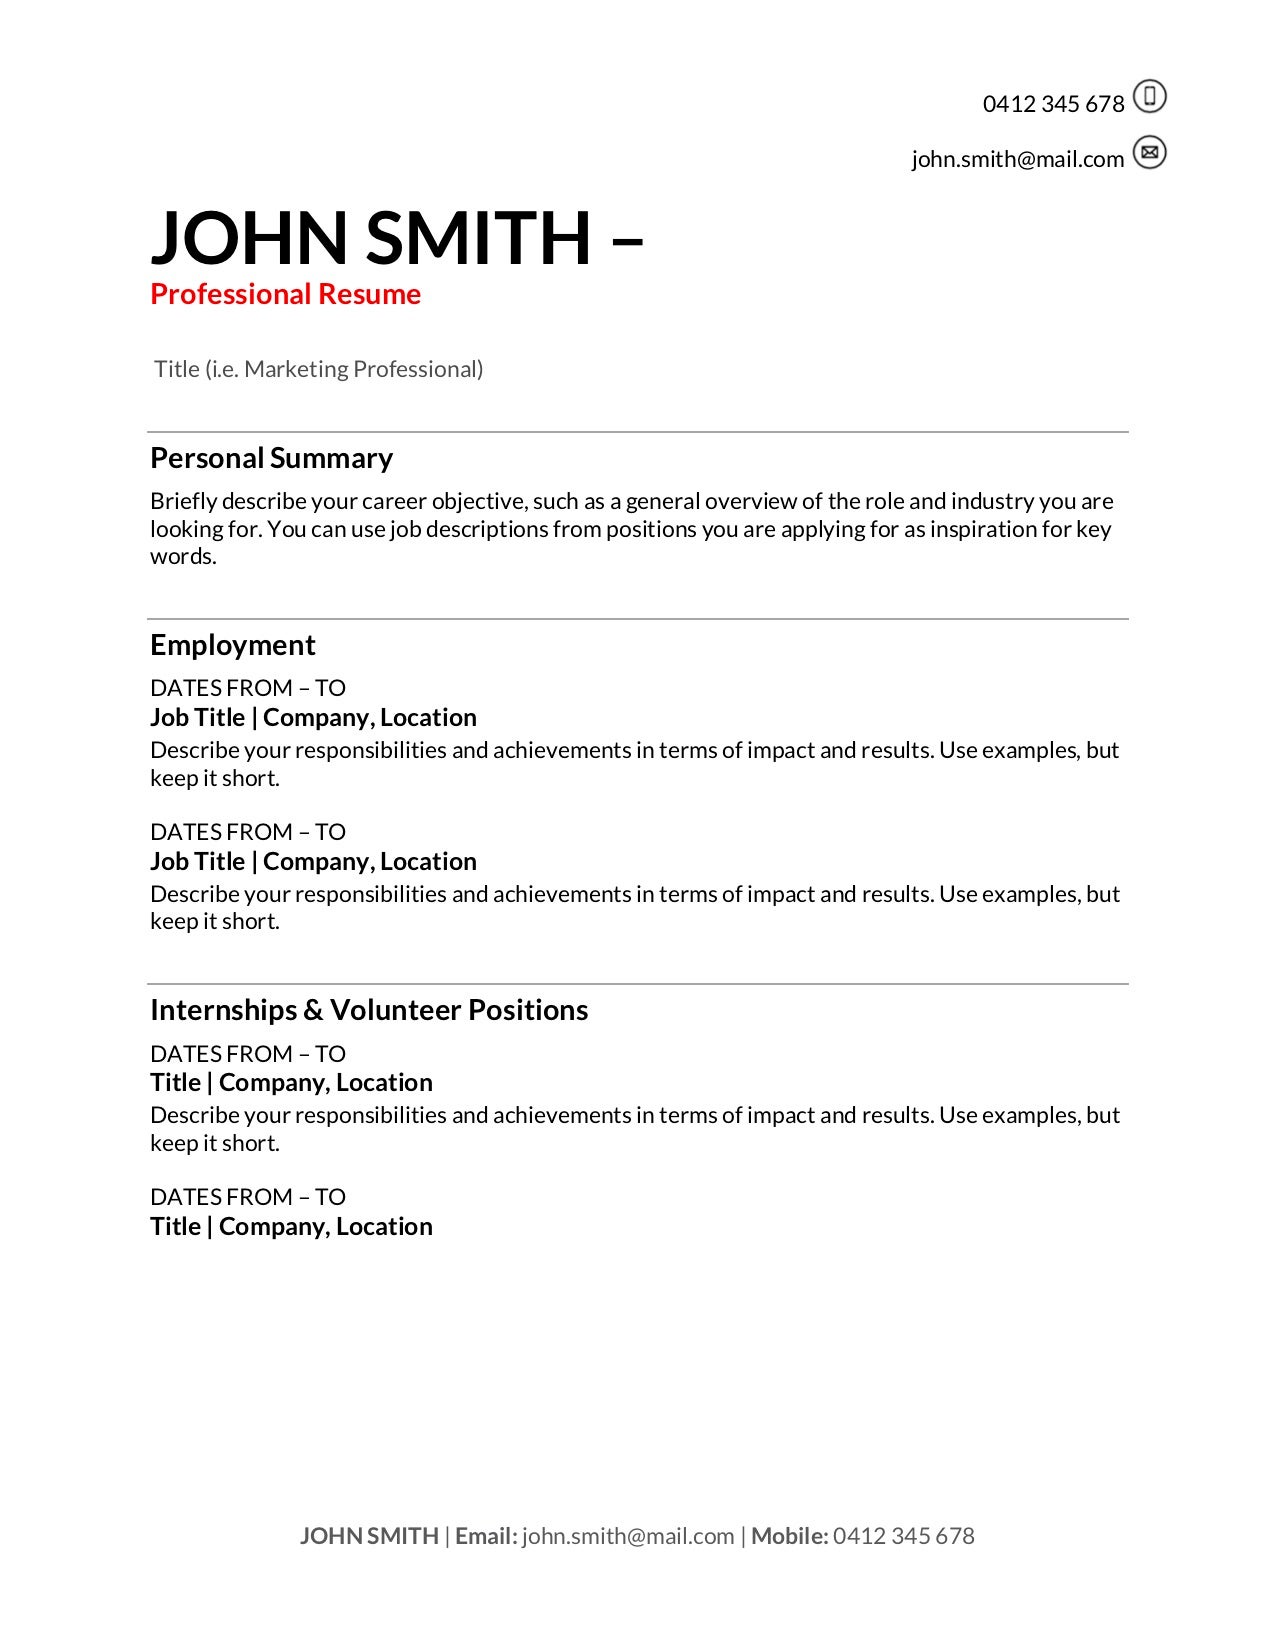 free download resume templates for creatives